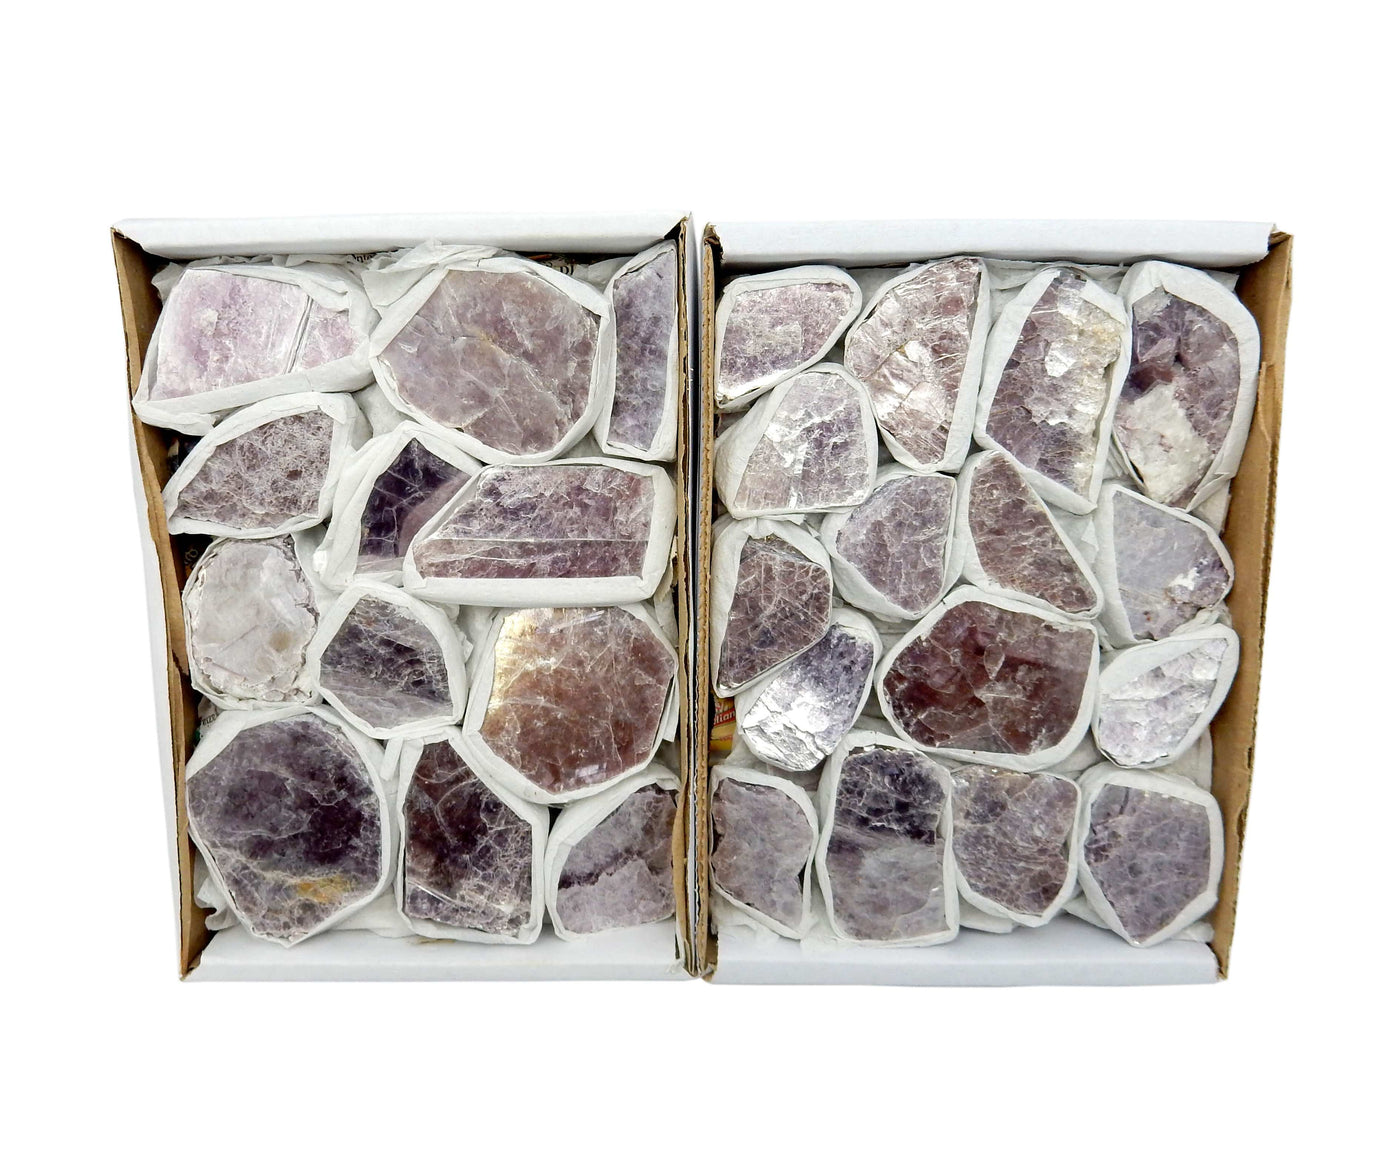 Lepidolite Mica Flat Box - showing 2 boxes for showing varying color, size and shapes of stones